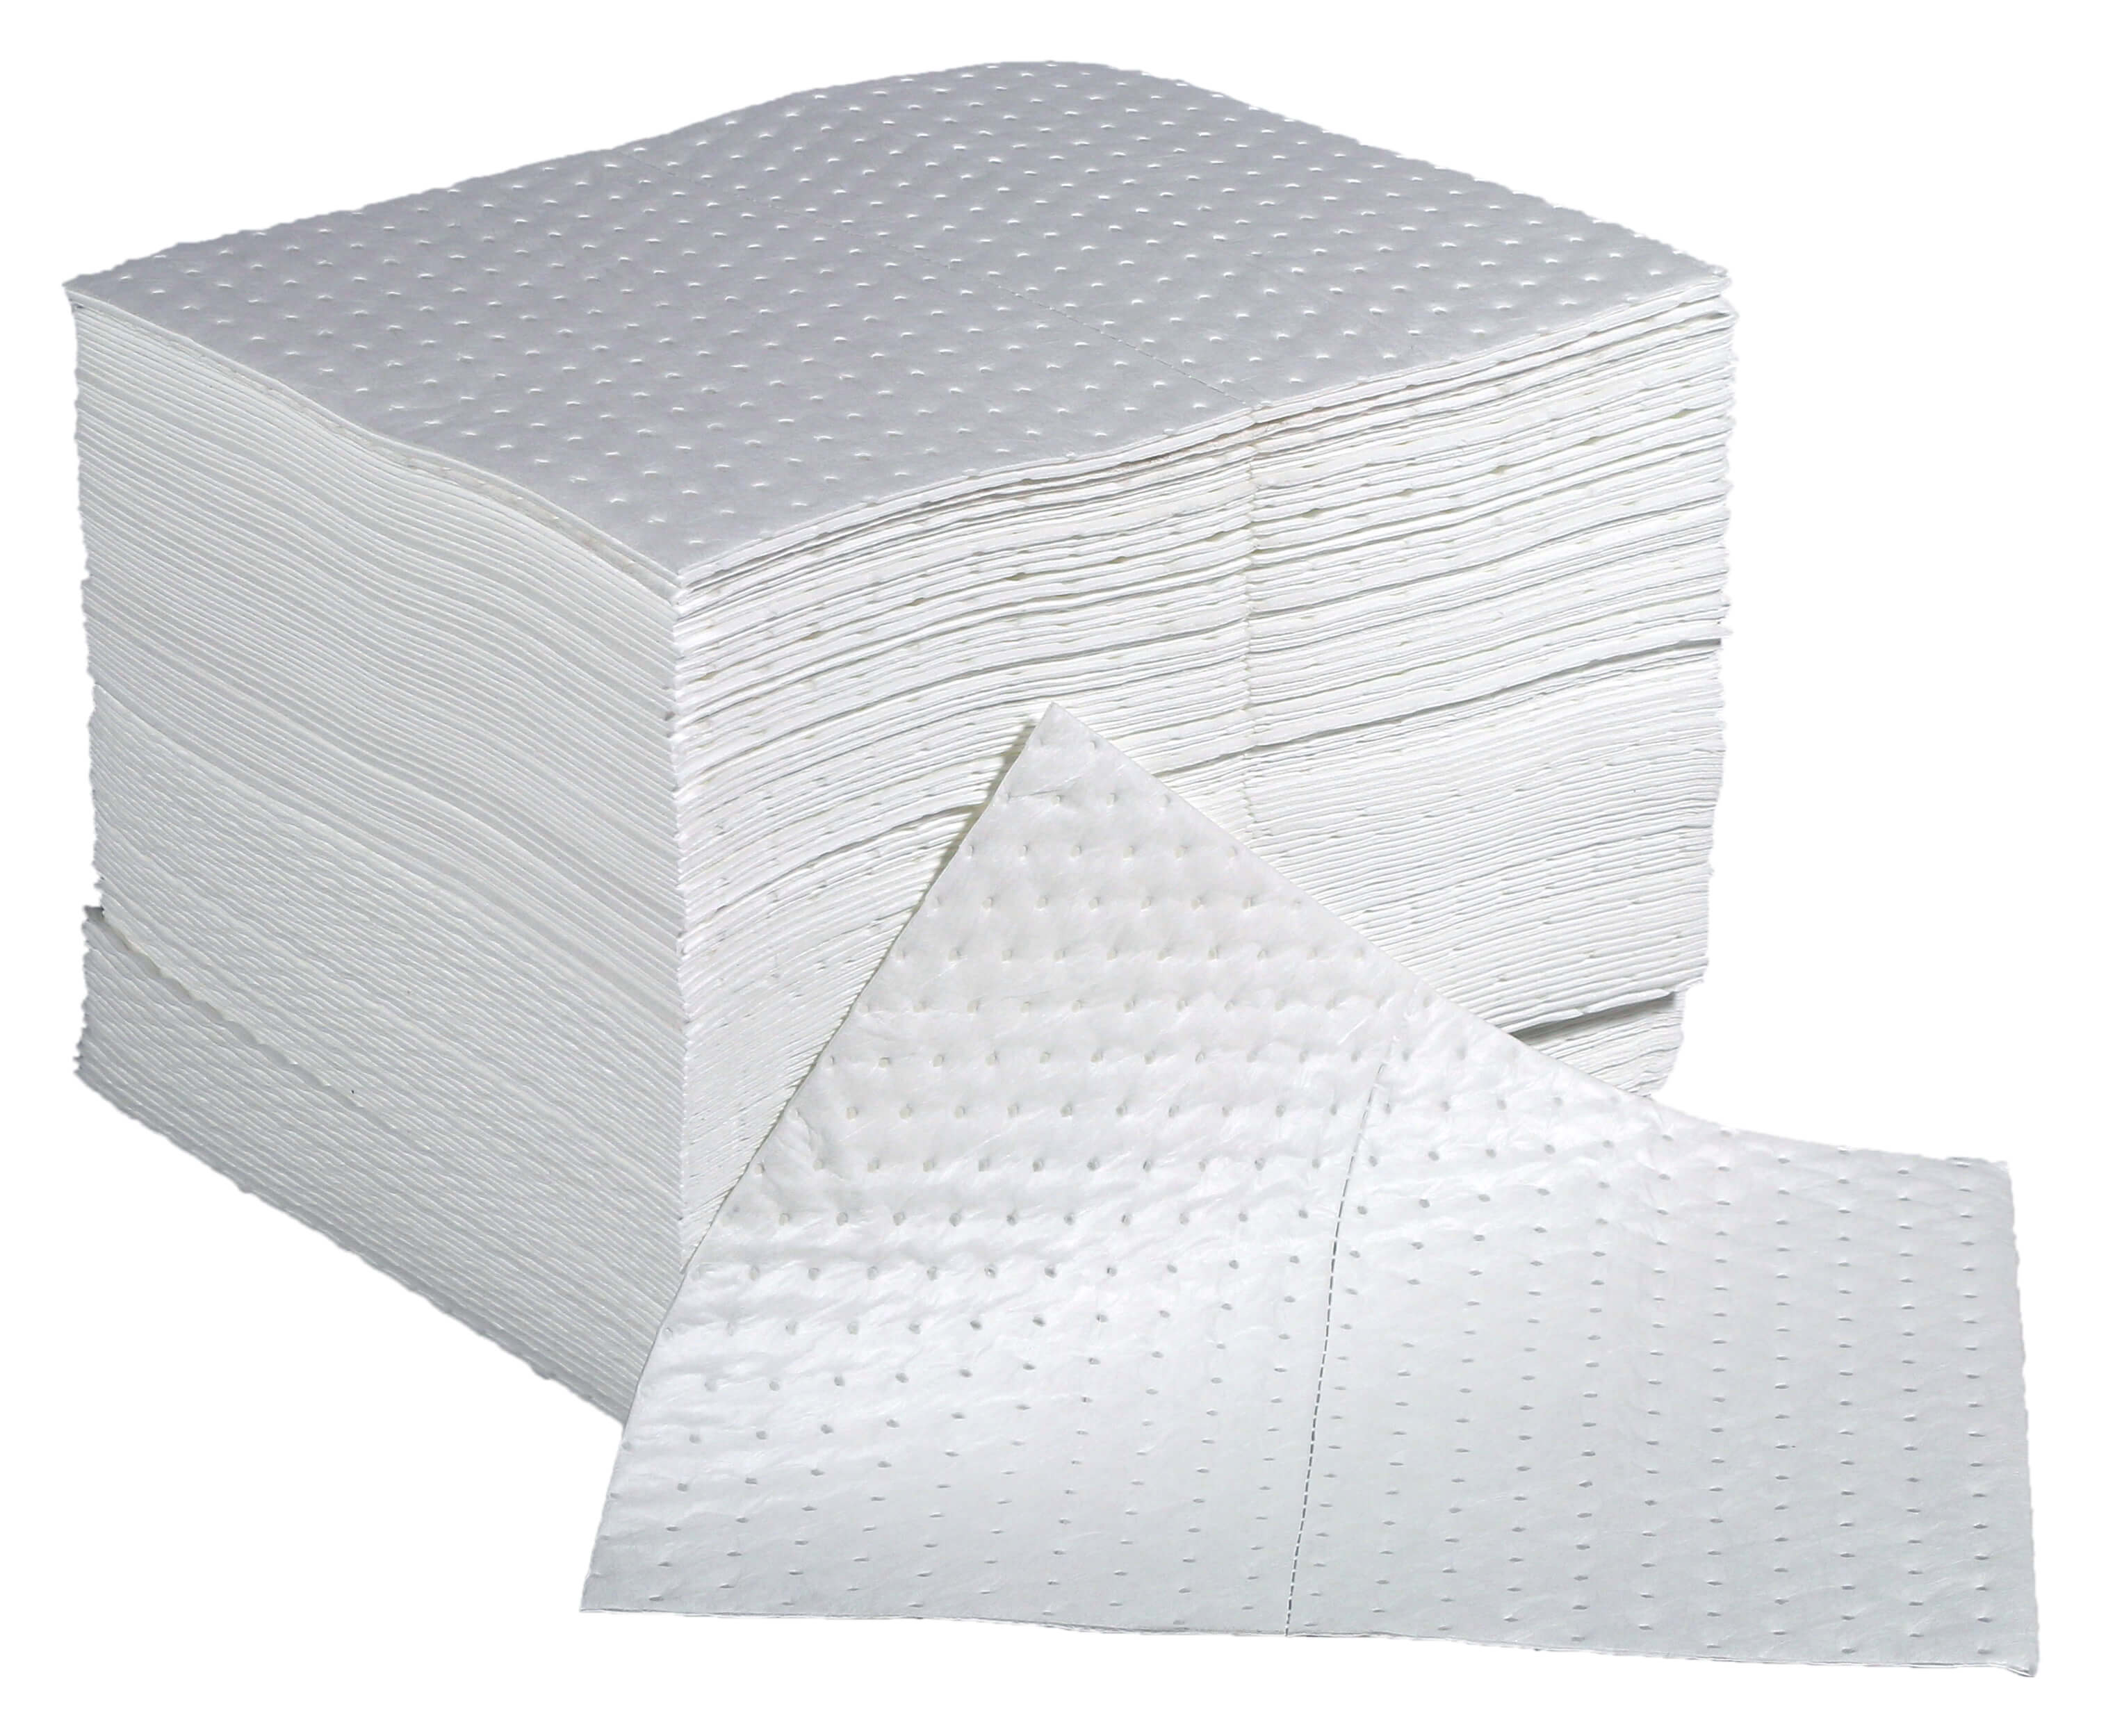 Premium Weight Oil & Fuel Absorbent Pads - Box of 100